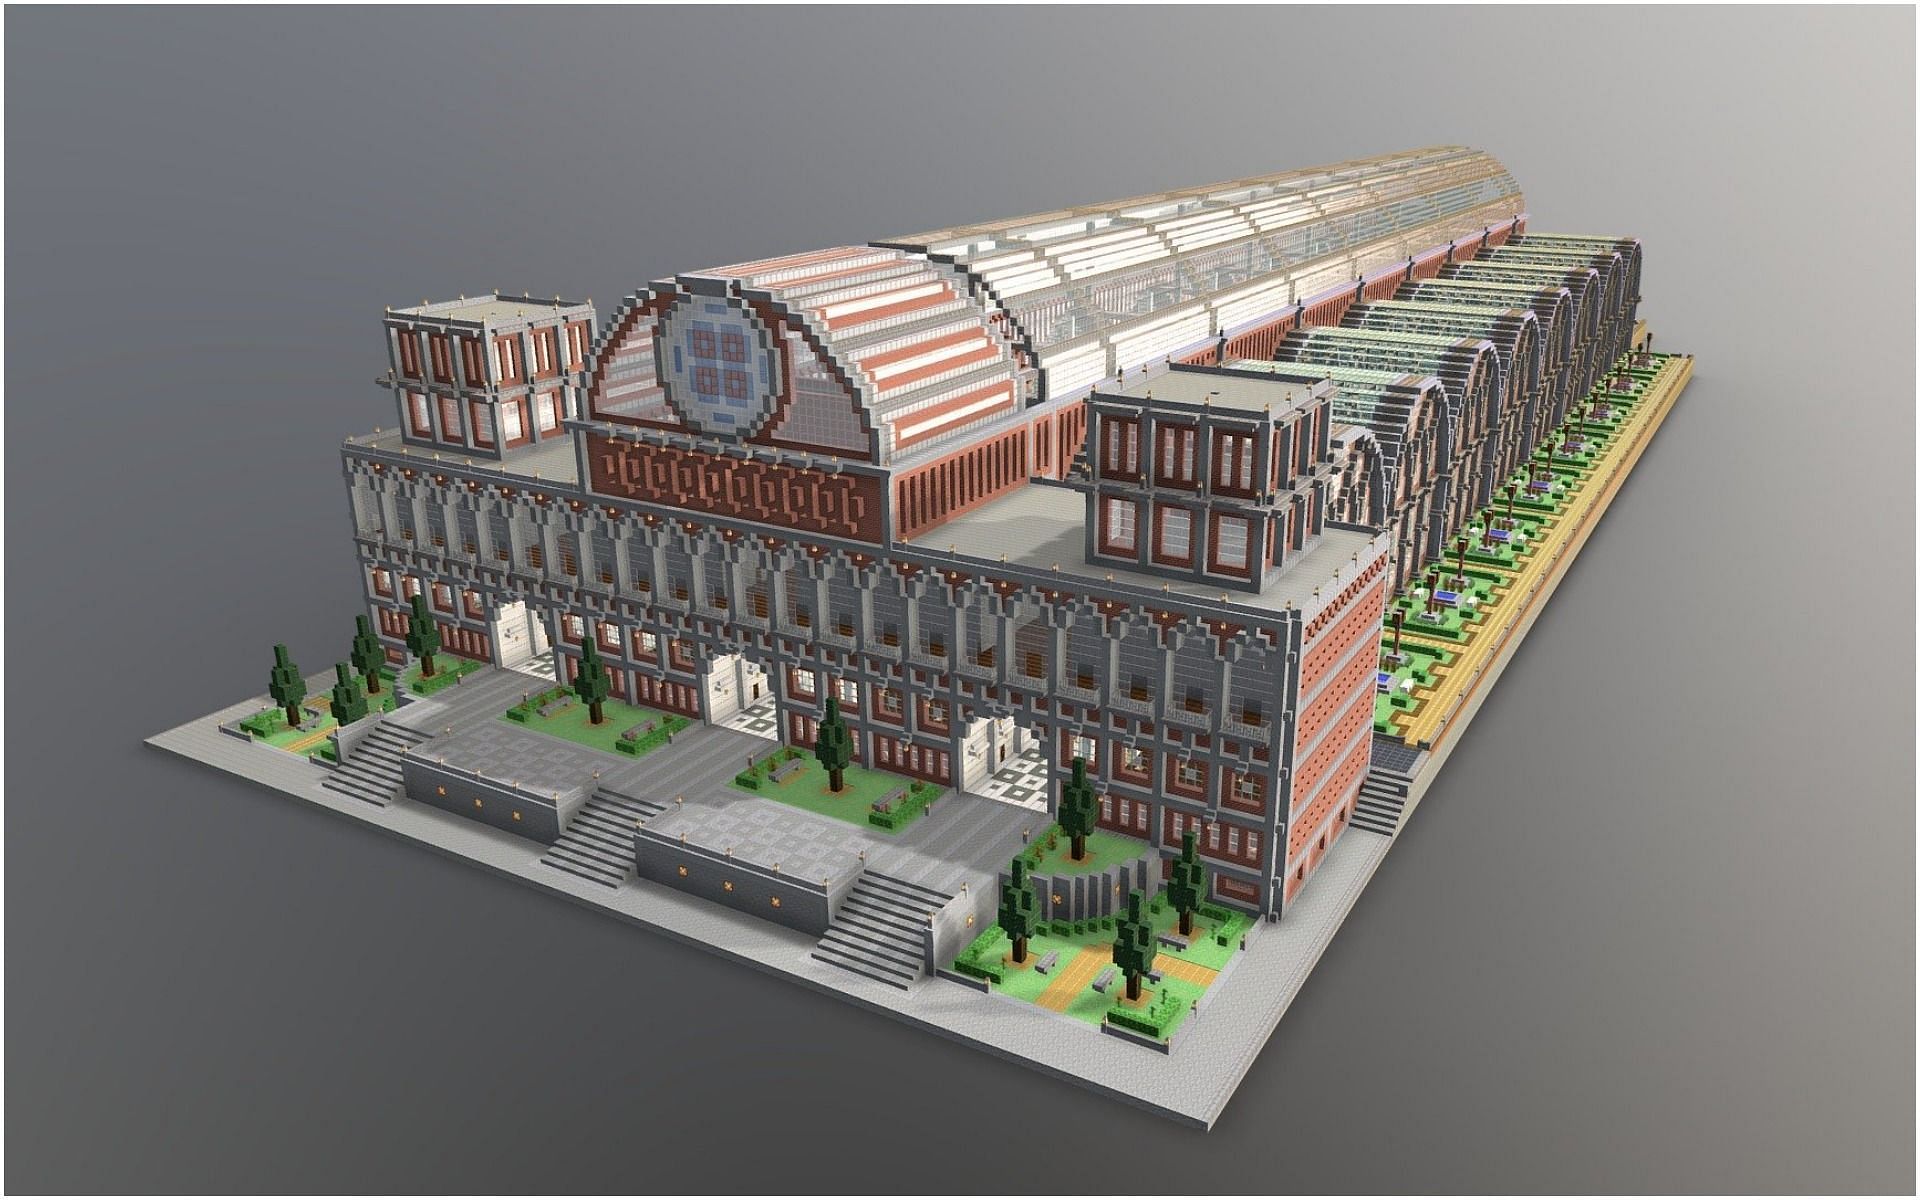 A different concept design for a railway station in Minecraft (Image via Sketchfab/RH)